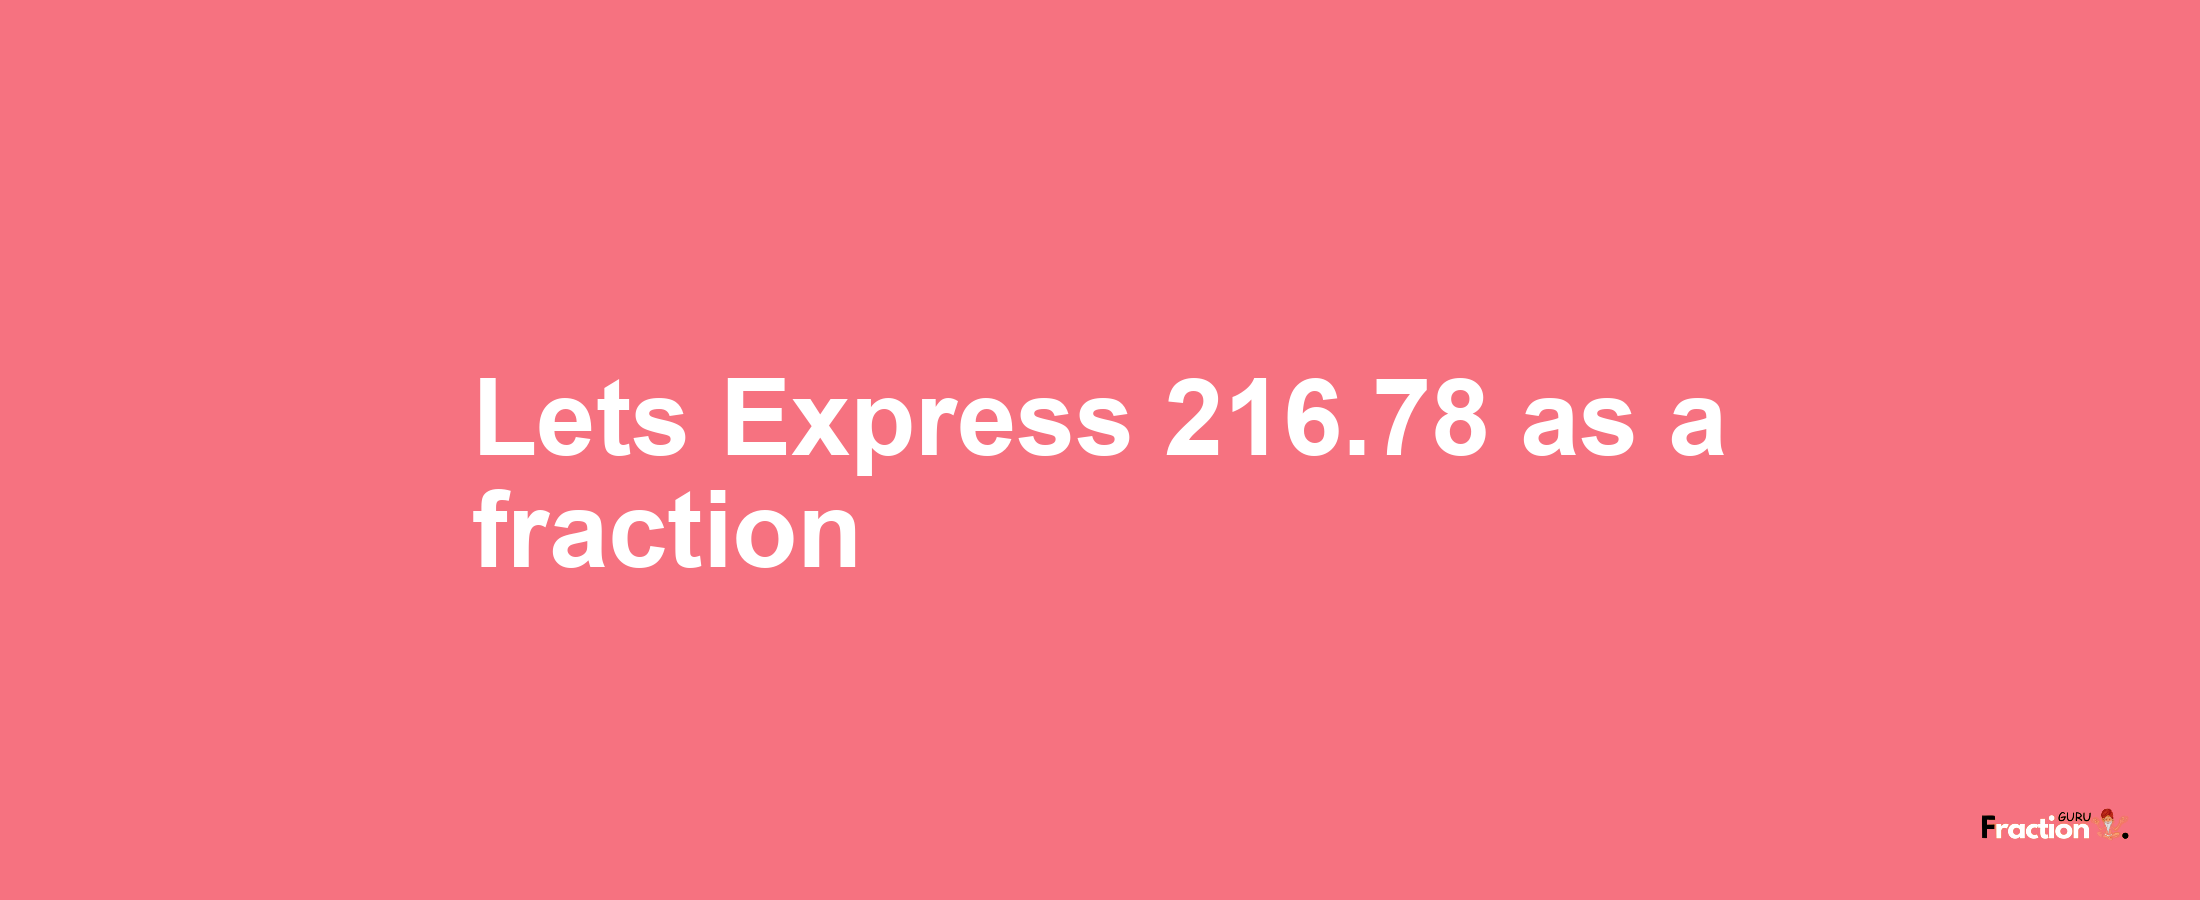 Lets Express 216.78 as afraction